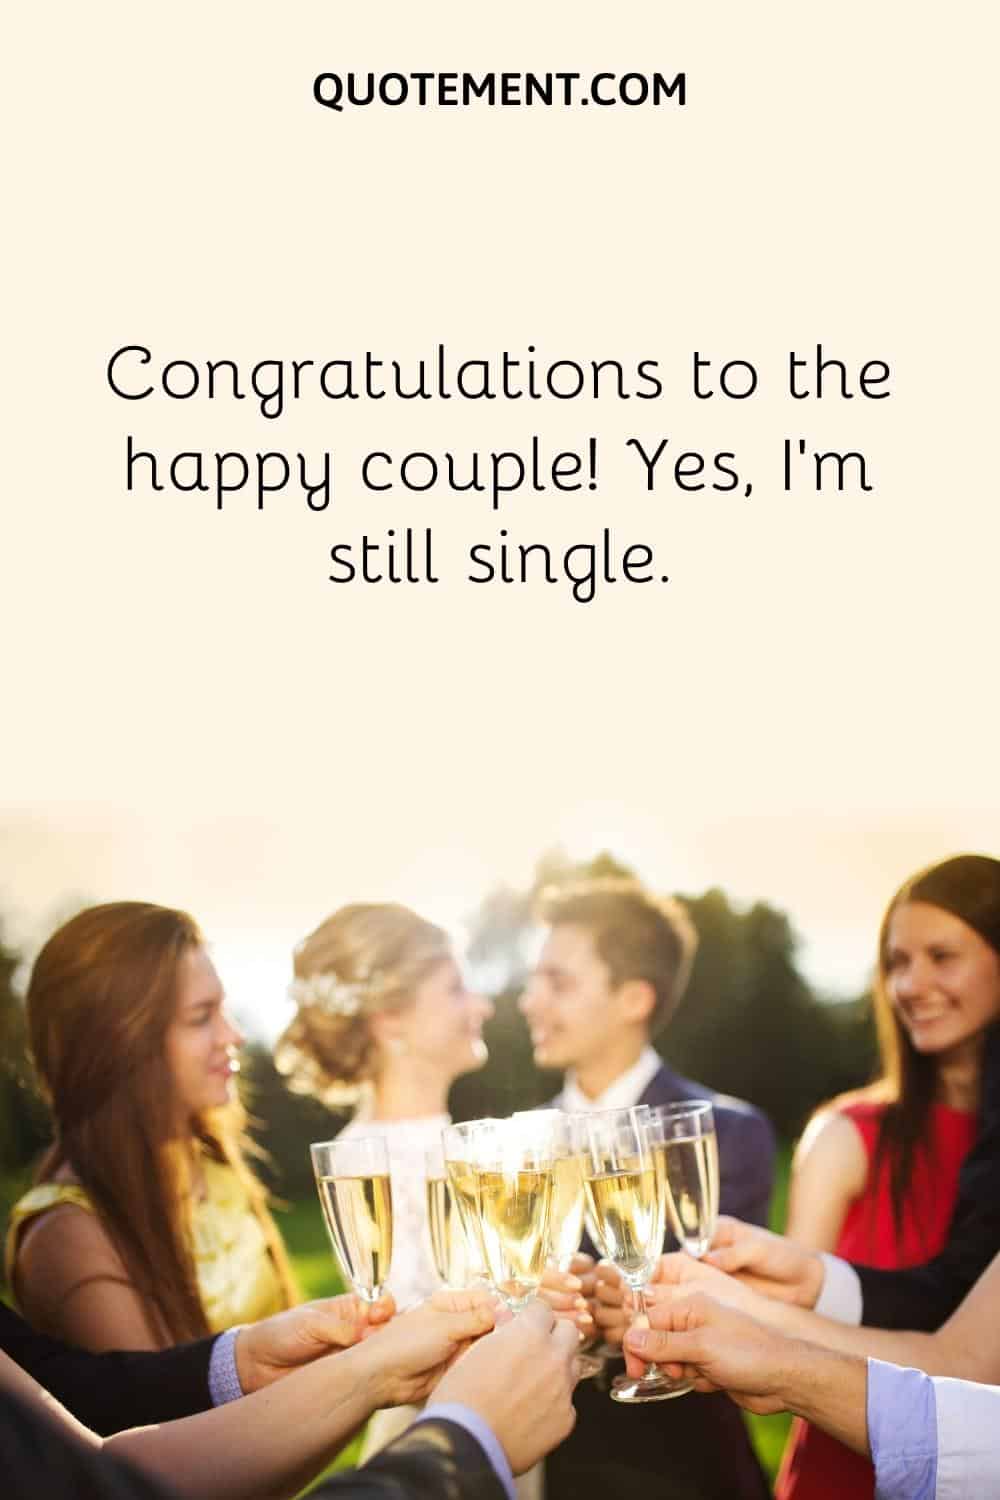 Congratulations to the happy couple! Yes, I’m still single.